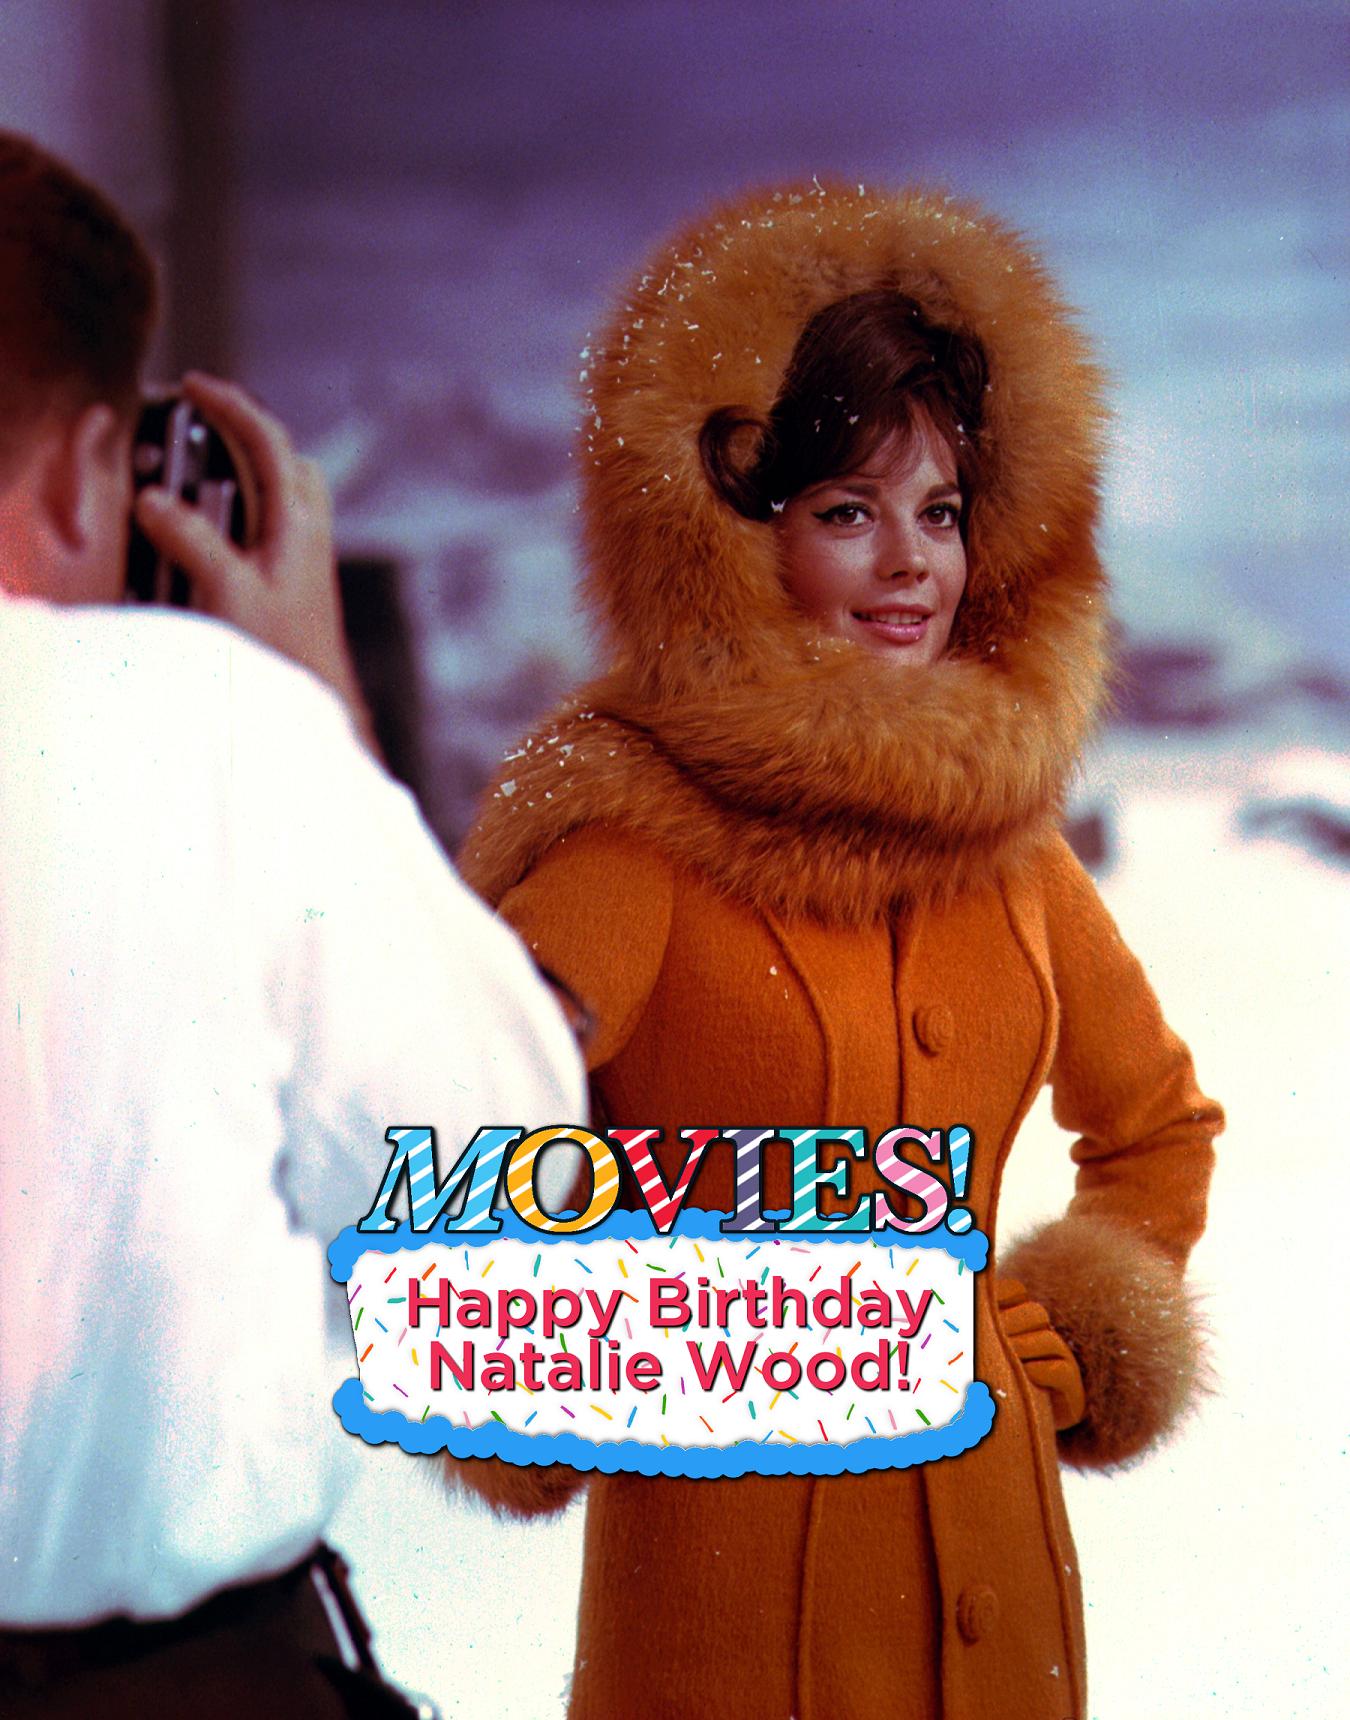 Happy Birthday Natalie Wood!
Catch her tonight in THE GREAT RACE at 8pm ET | 5pm PT. 